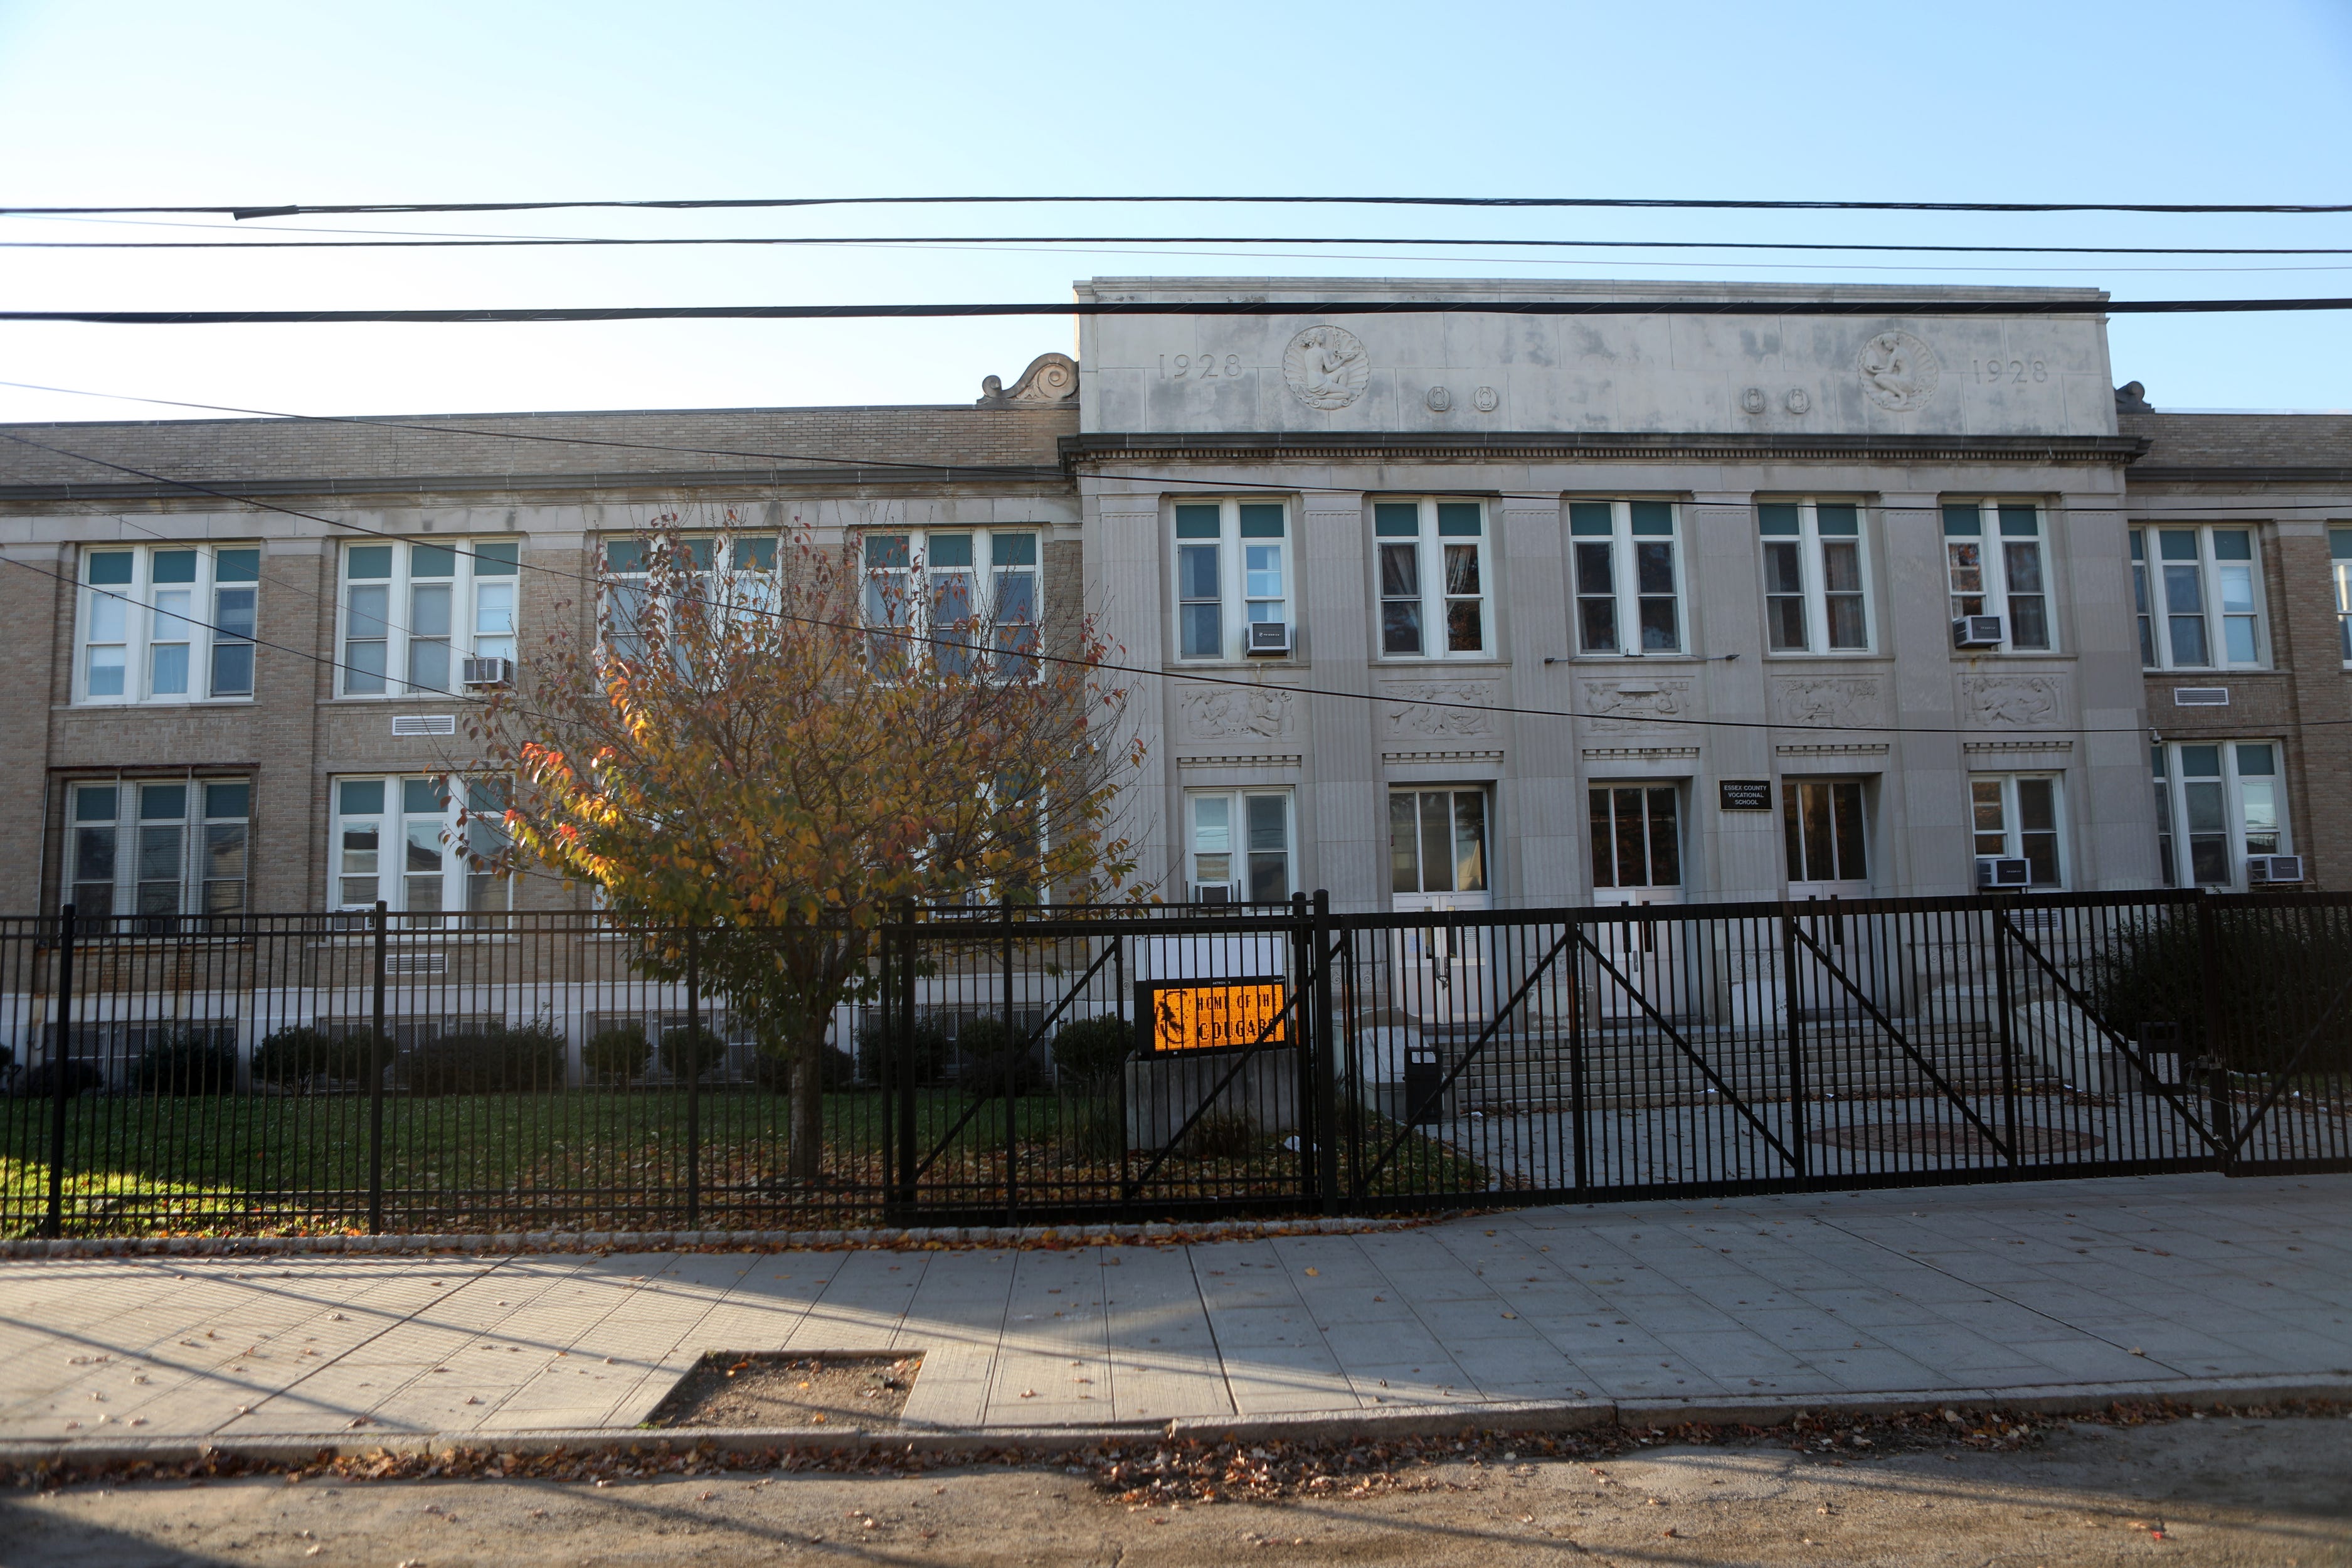 TEAM Academy has purchased this Newark building from Essex County county instead of renting it from one of its support groups. It is located at 300 13th St. in Newark.